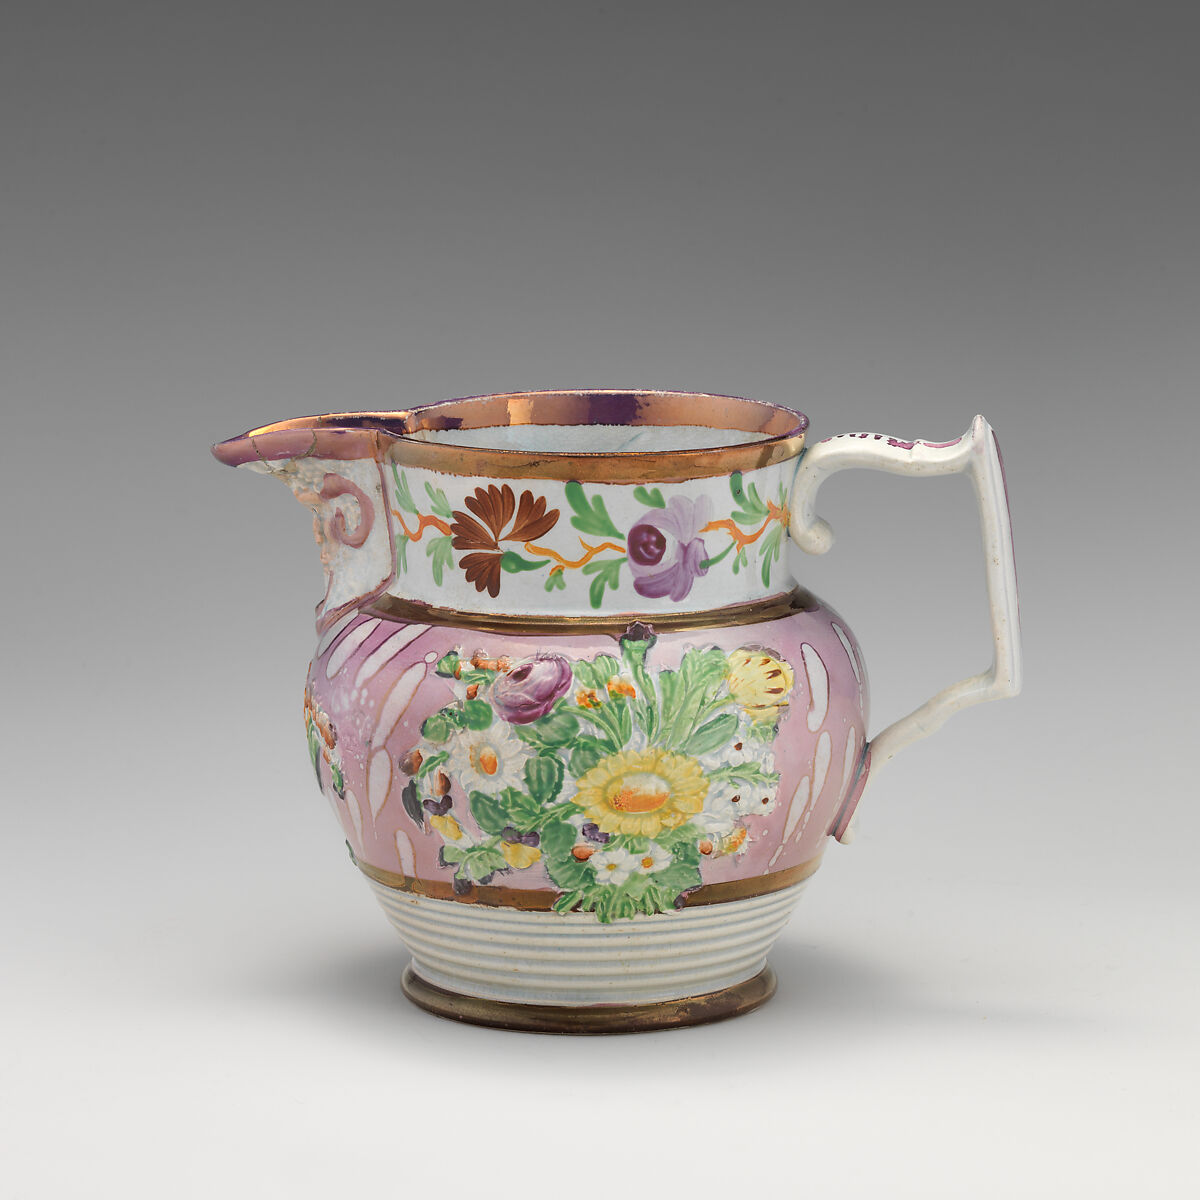 Jug, Possibly by Keeling and Co., Pottery, British, Staffordshire 